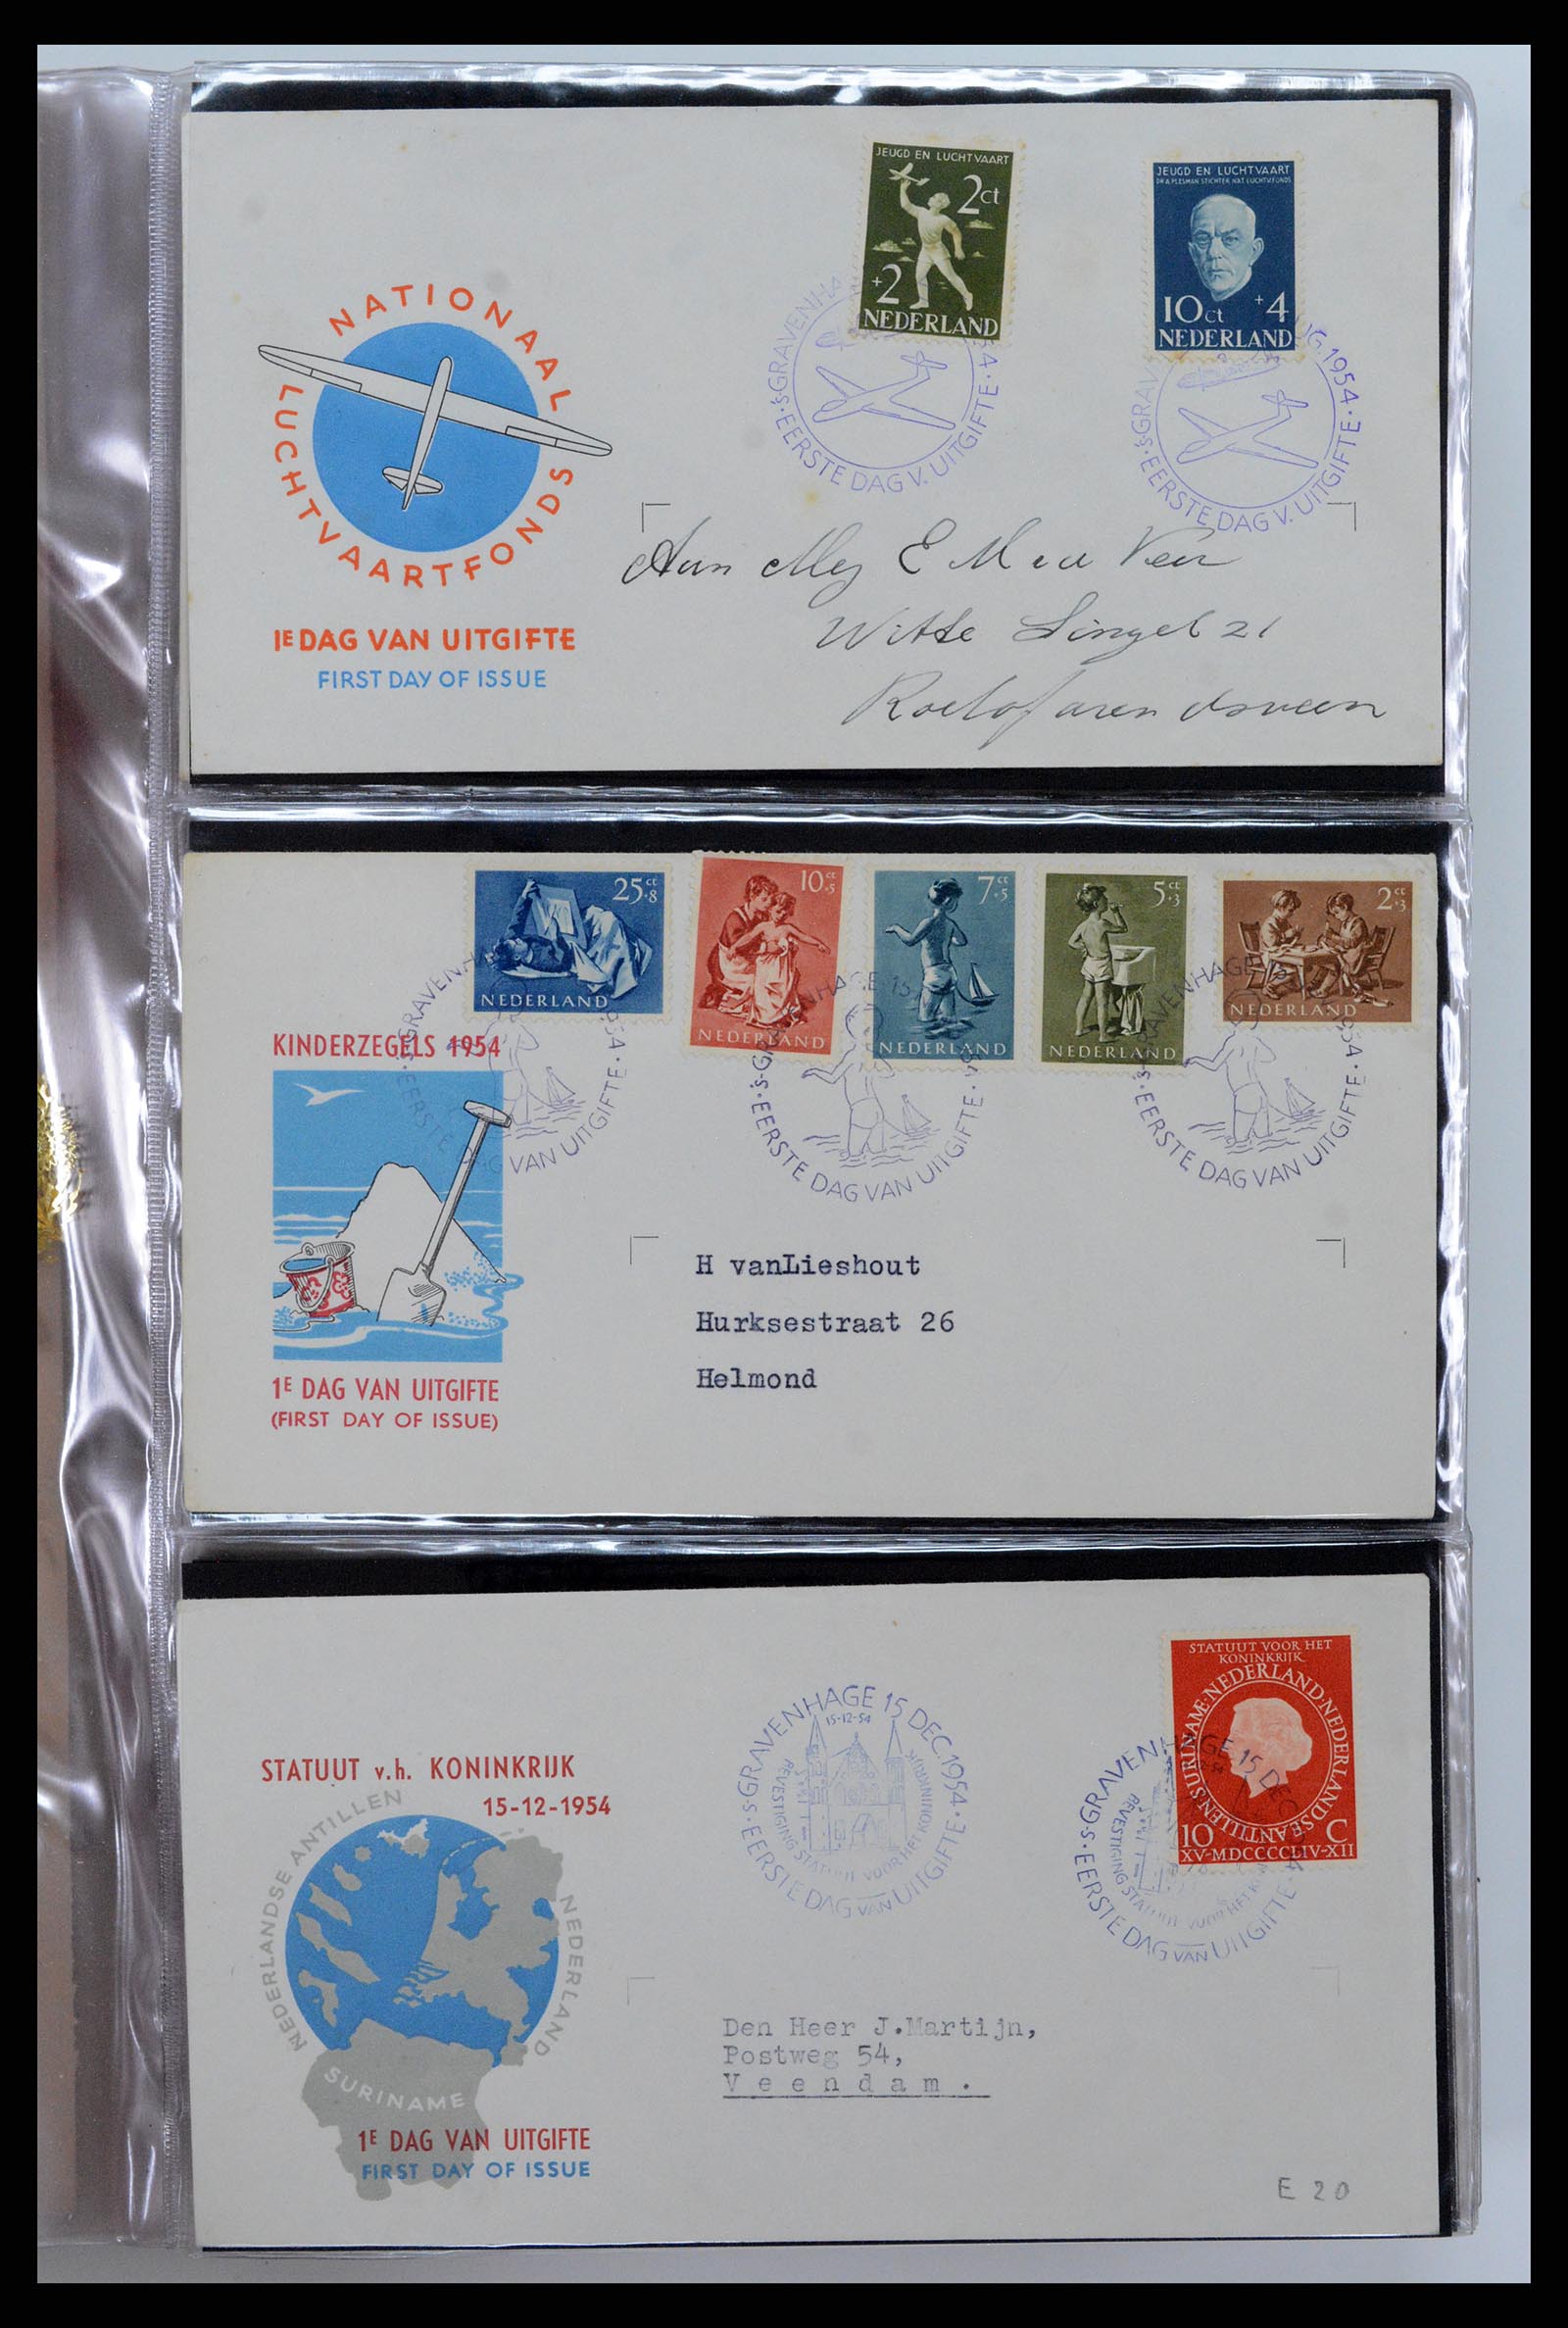 37461 007 - Stamp collection 37461 Netherlands FDC's 1950-2014.